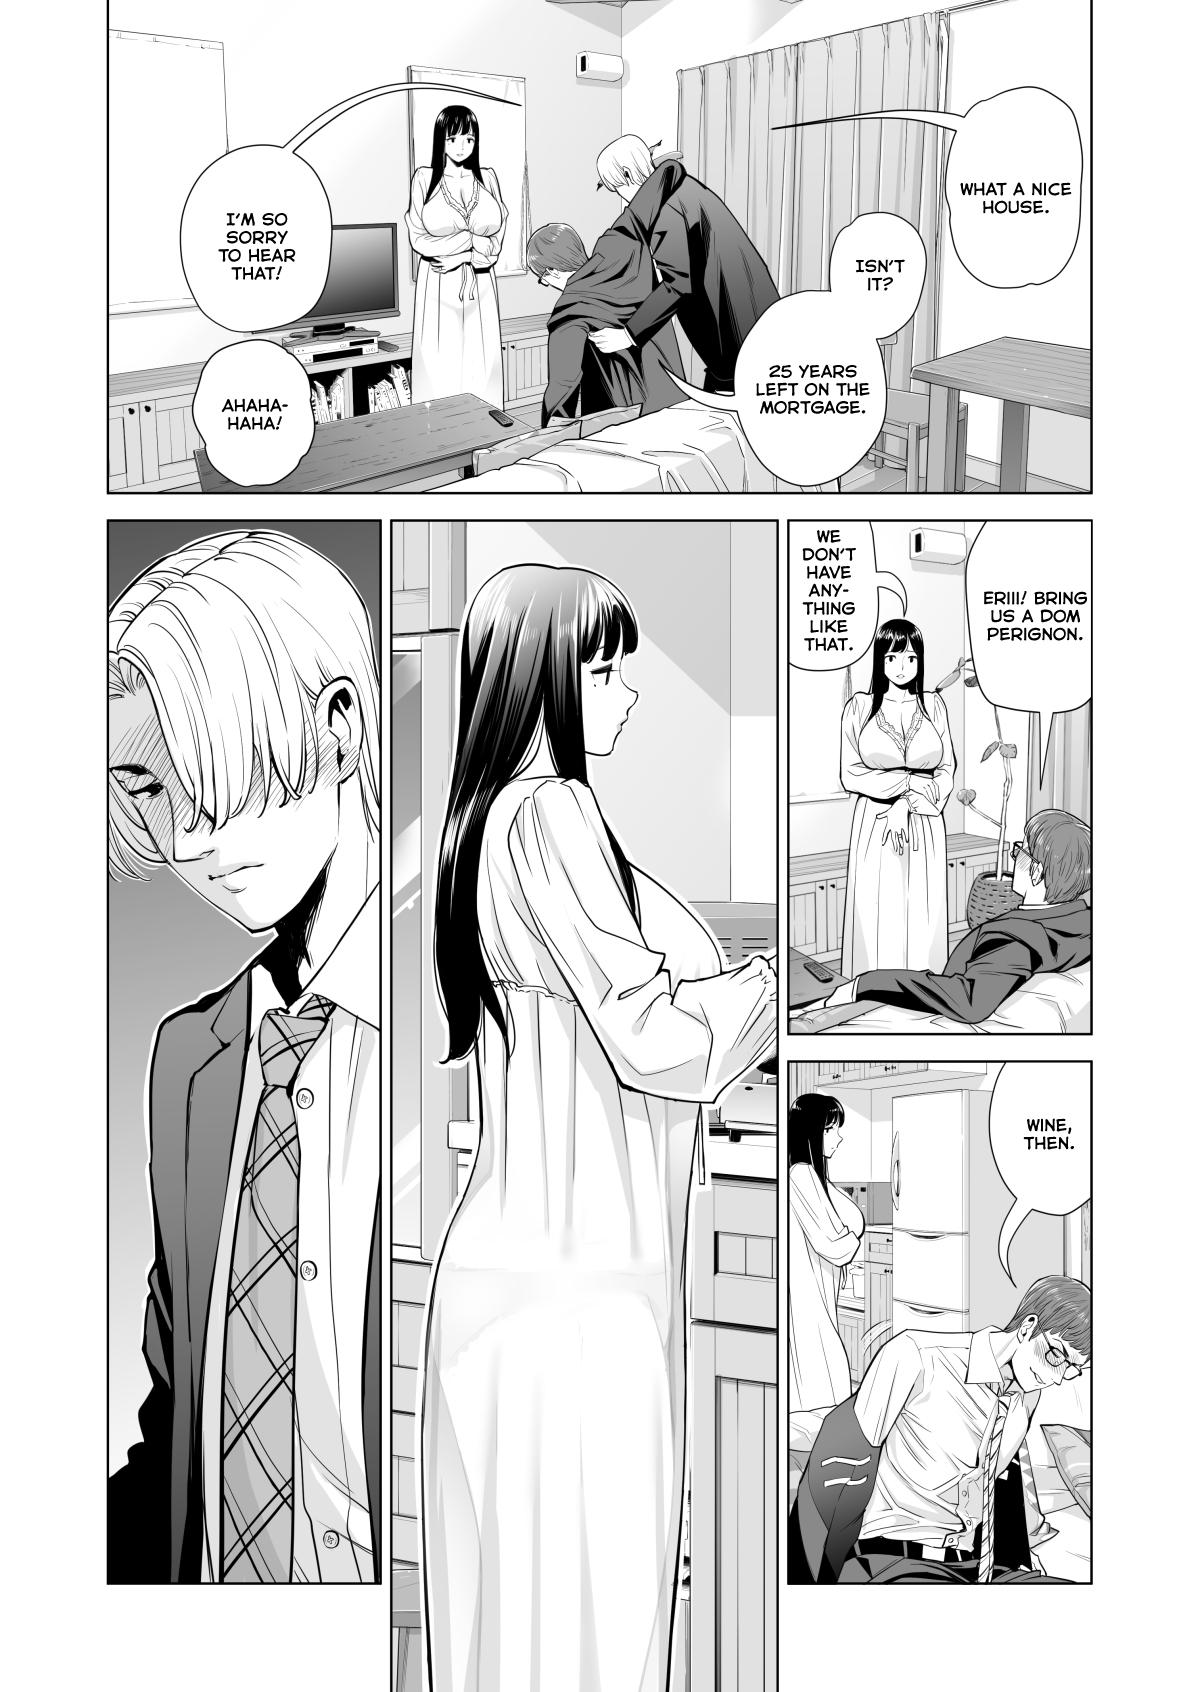 [HGT Lab (Tsusauto)] Tsukiyo no Midare Zake (Zenpen) Moonlit Intoxication ~ A Housewife Stolen by a Coworker Besides her Blackout Drunk Husband ~ Chapter 1 [English] 14